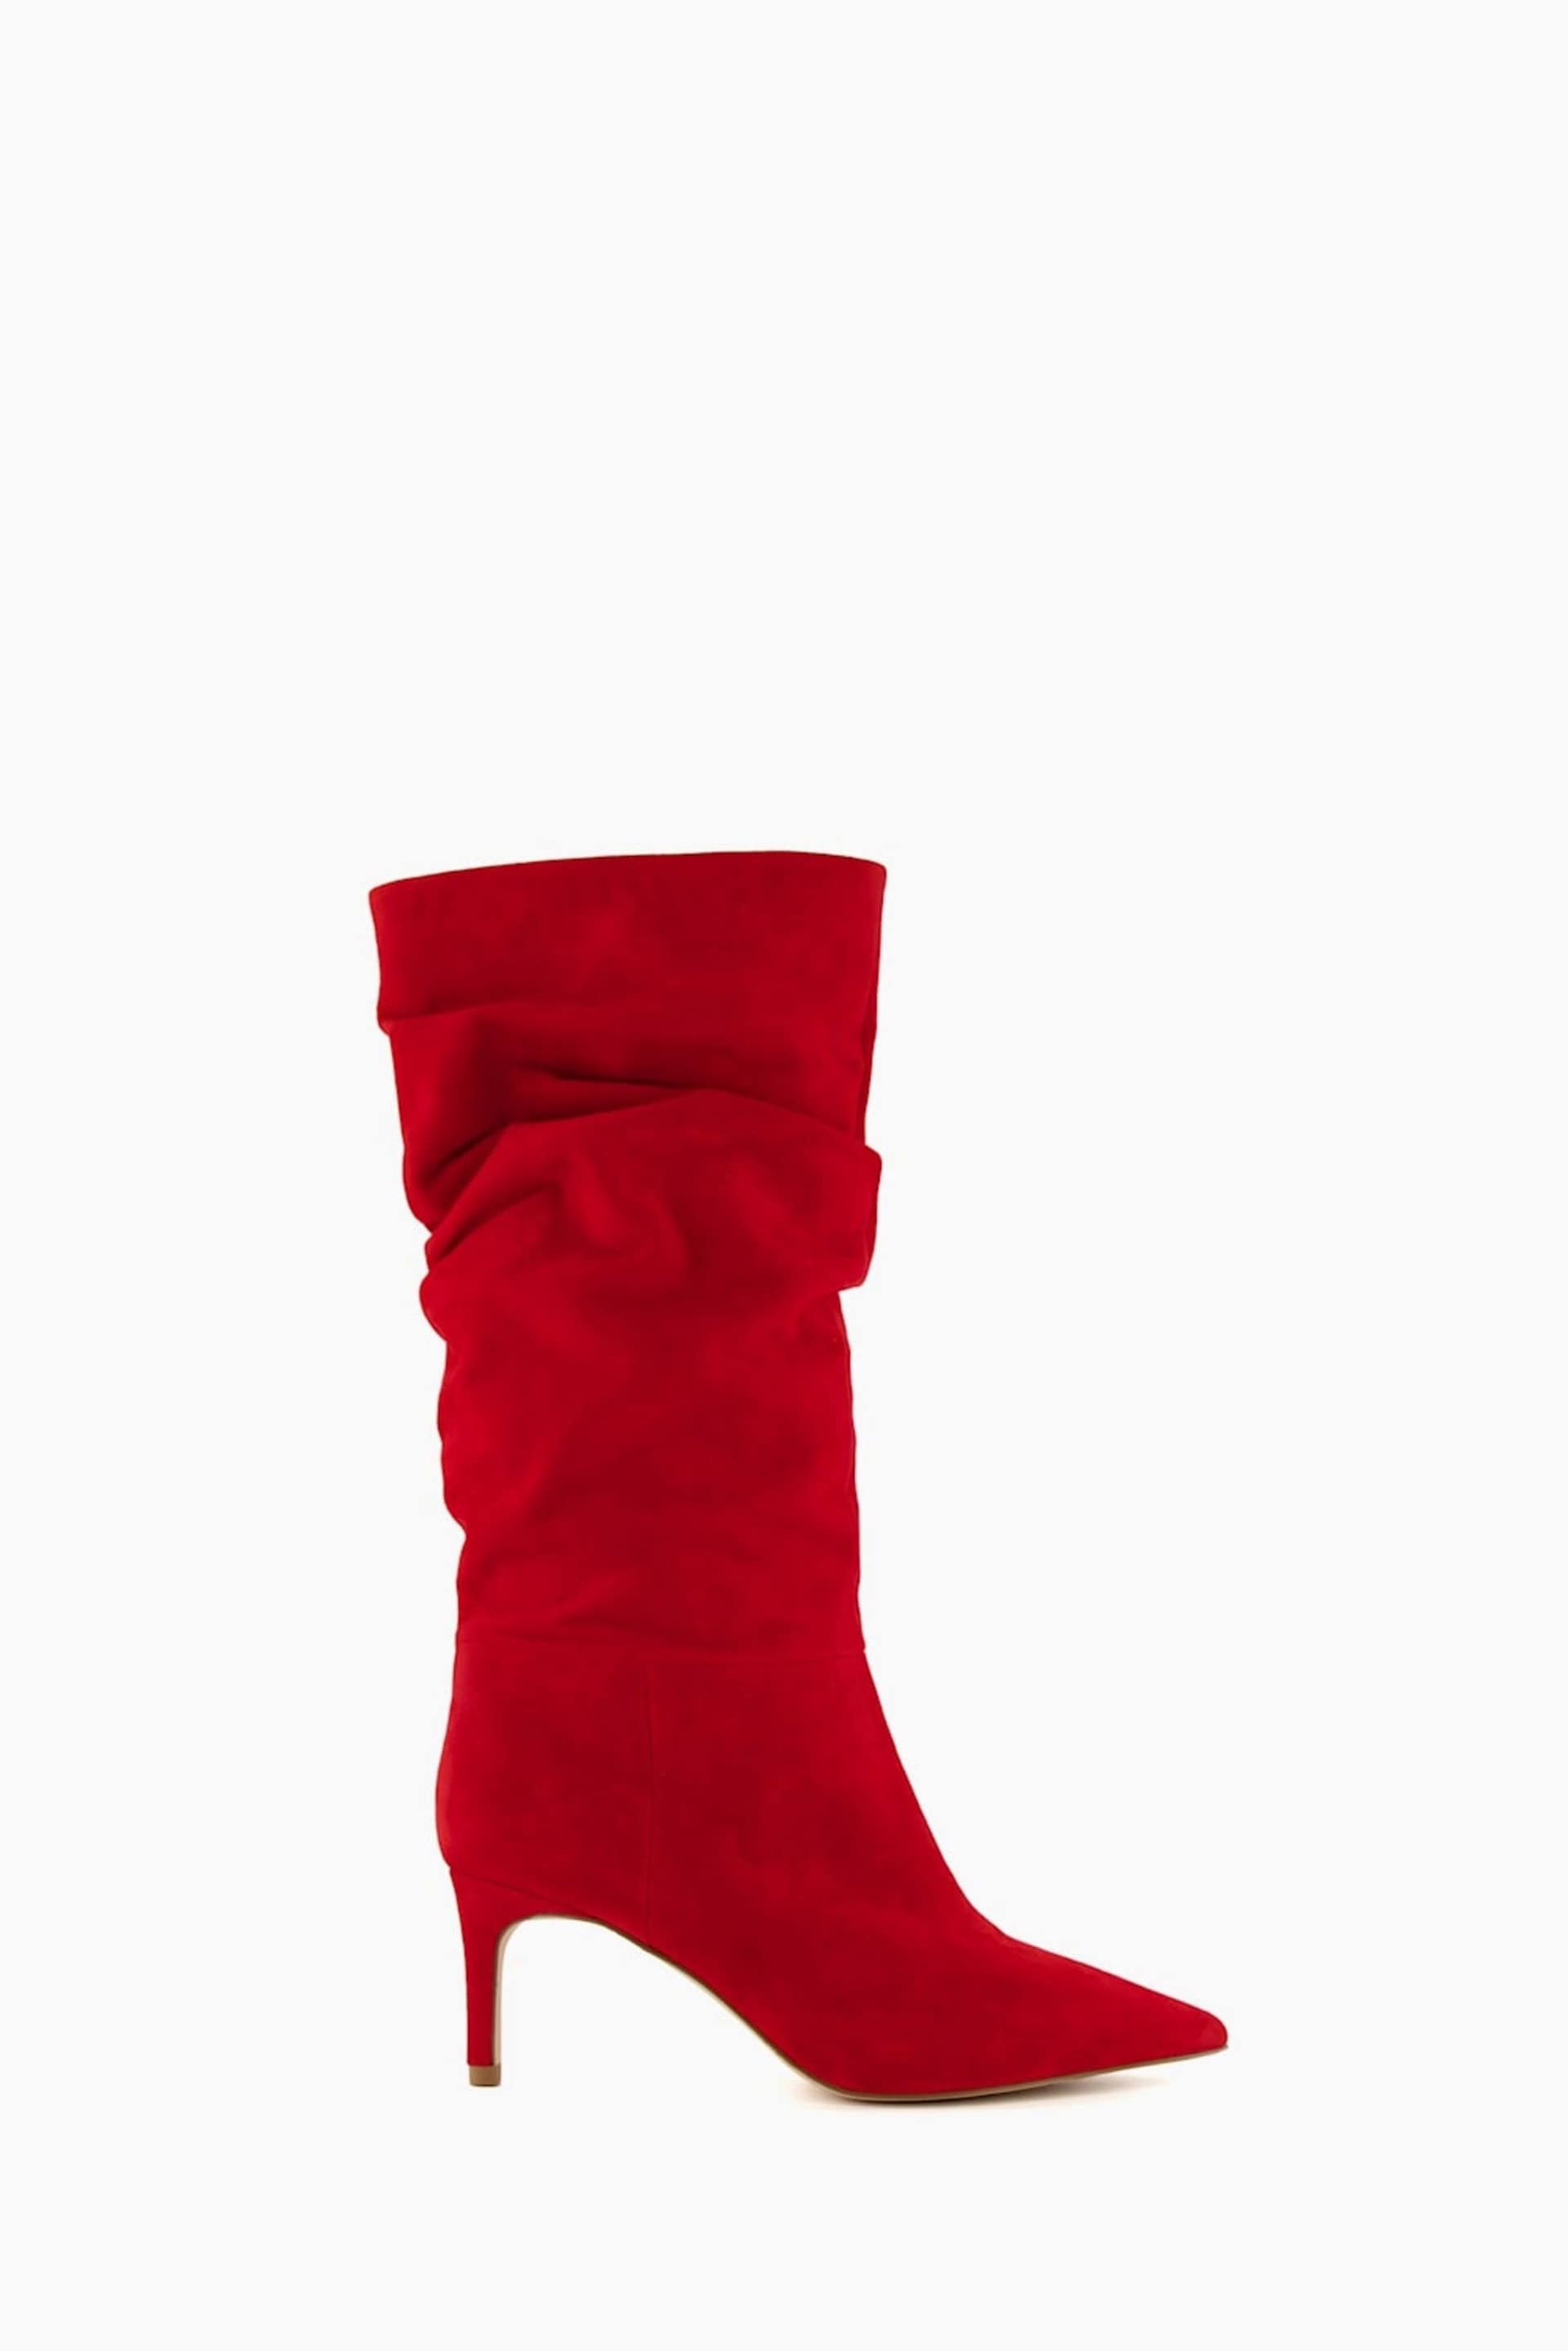 Dune London Red Slouch Ruched Suede Heeled Boots - Image 1 of 4